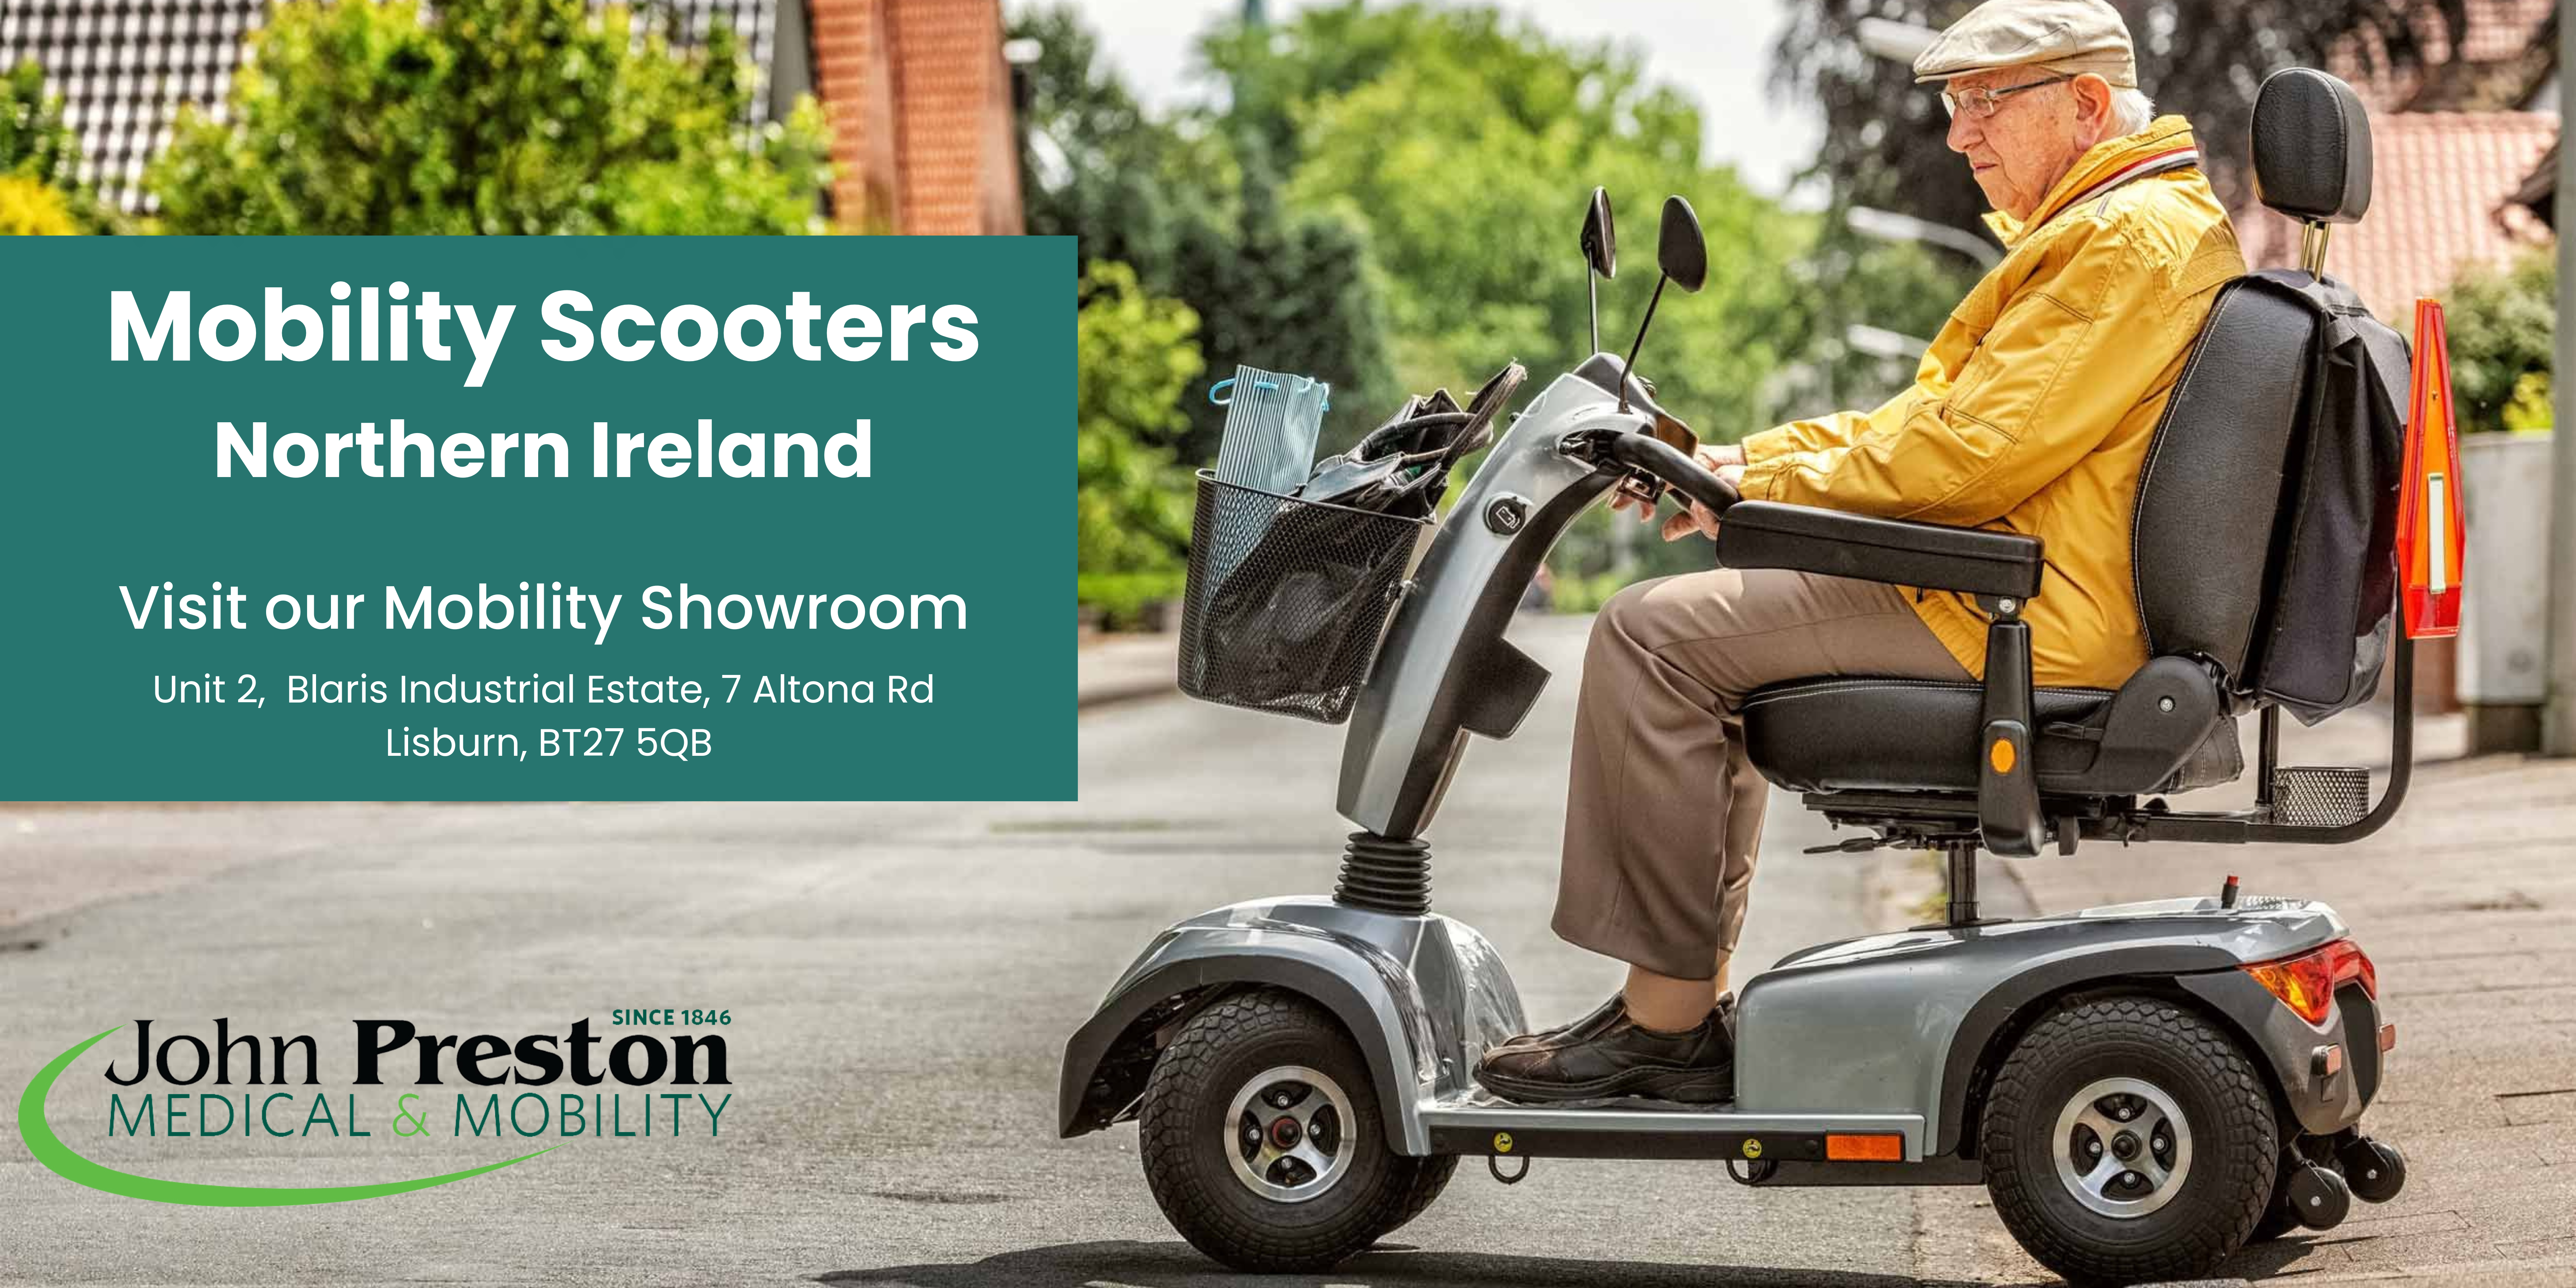 Our most popular mobility scooters of 2022 